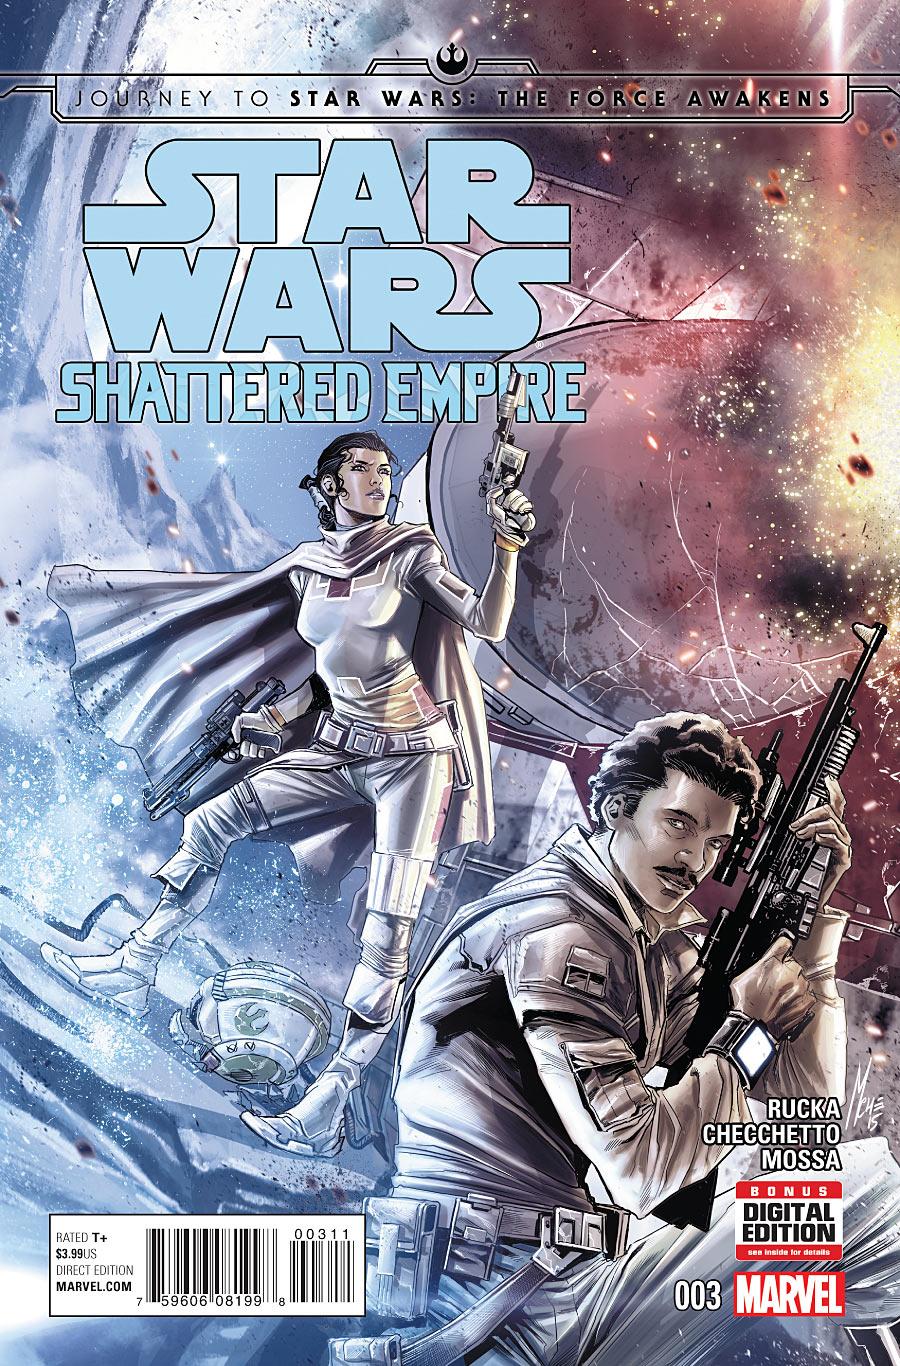 Journey to Star Wars: The Force Awakens - Shattered Empire Vol. 1 #3